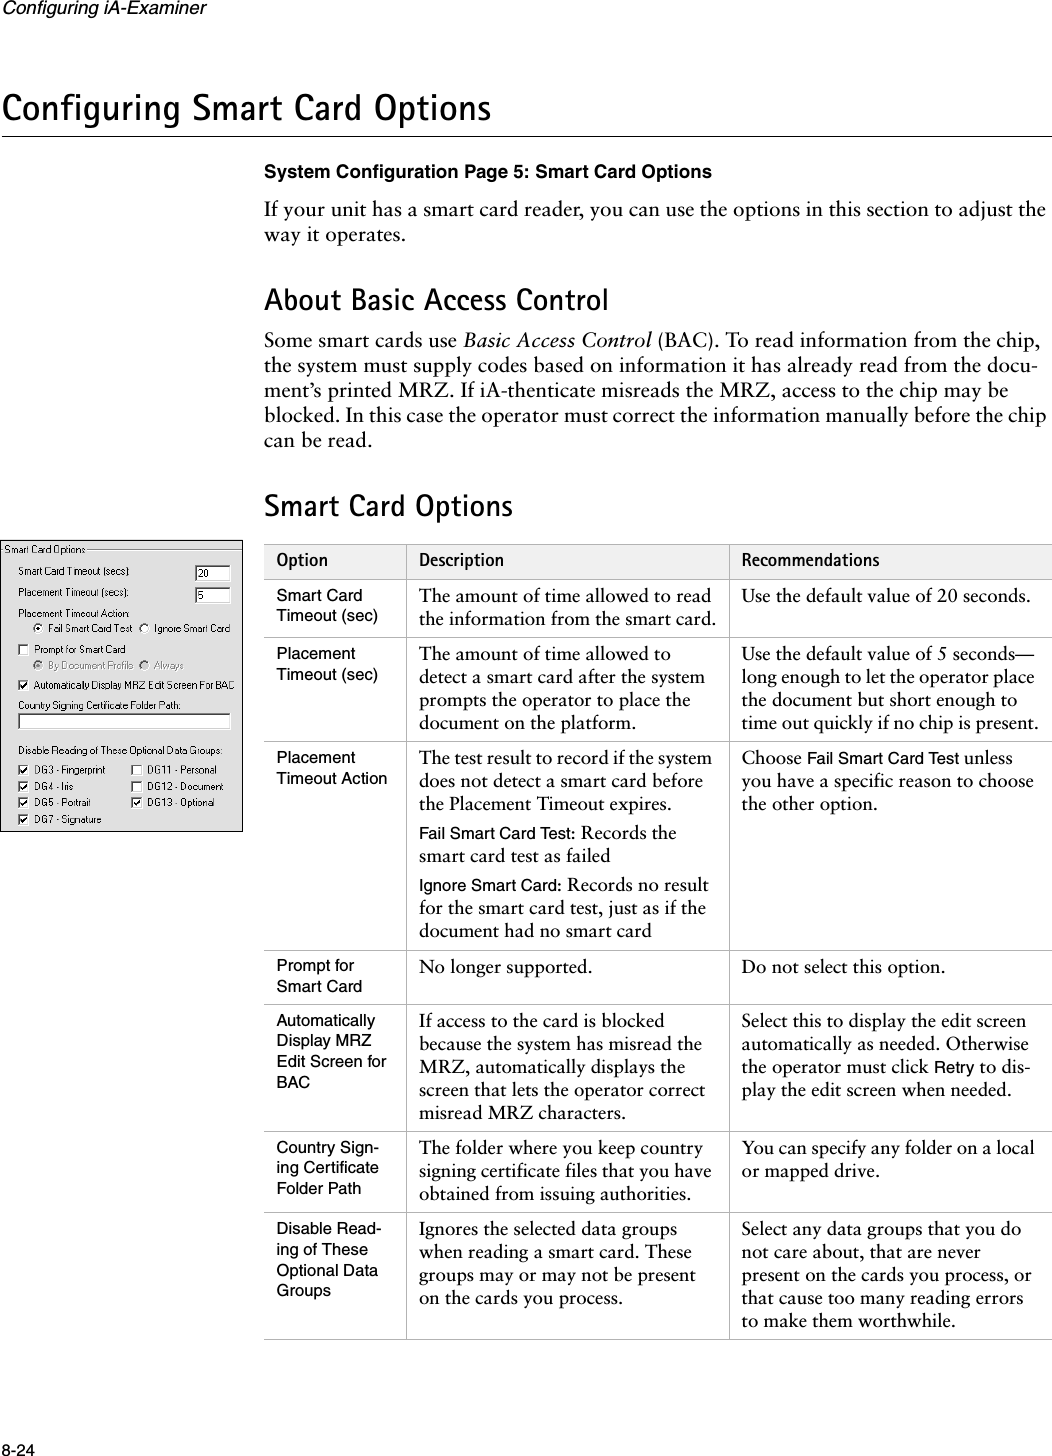 Configuring iA-Examiner8-24Configuring Smart Card OptionsSystem Configuration Page 5: Smart Card OptionsIf your unit has a smart card reader, you can use the options in this section to adjust the way it operates.About Basic Access ControlSome smart cards use Basic Access Control (BAC). To read information from the chip, the system must supply codes based on information it has already read from the docu-ment’s printed MRZ. If iA-thenticate misreads the MRZ, access to the chip may be blocked. In this case the operator must correct the information manually before the chip can be read.Smart Card OptionsOption Description RecommendationsSmart Card Timeout (sec)The amount of time allowed to read the information from the smart card.Use the default value of 20 seconds.Placement Timeout (sec)The amount of time allowed to detect a smart card after the system prompts the operator to place the document on the platform.Use the default value of 5 seconds— long enough to let the operator place the document but short enough to time out quickly if no chip is present.Placement Timeout ActionThe test result to record if the system does not detect a smart card before the Placement Timeout expires.Fail Smart Card Test: Records the smart card test as failedIgnore Smart Card: Records no result for the smart card test, just as if the document had no smart cardChoose Fail Smart Card Test unless you have a specific reason to choose the other option.Prompt for Smart CardNo longer supported. Do not select this option.Automatically Display MRZ Edit Screen for BACIf access to the card is blocked because the system has misread the MRZ, automatically displays the screen that lets the operator correct misread MRZ characters.Select this to display the edit screen automatically as needed. Otherwise the operator must click Retry to dis-play the edit screen when needed.Country Sign-ing Certificate Folder PathThe folder where you keep country signing certificate files that you have obtained from issuing authorities.You can specify any folder on a local or mapped drive.Disable Read-ing of These Optional Data GroupsIgnores the selected data groups when reading a smart card. These groups may or may not be present on the cards you process.Select any data groups that you do not care about, that are never present on the cards you process, or that cause too many reading errors to make them worthwhile.